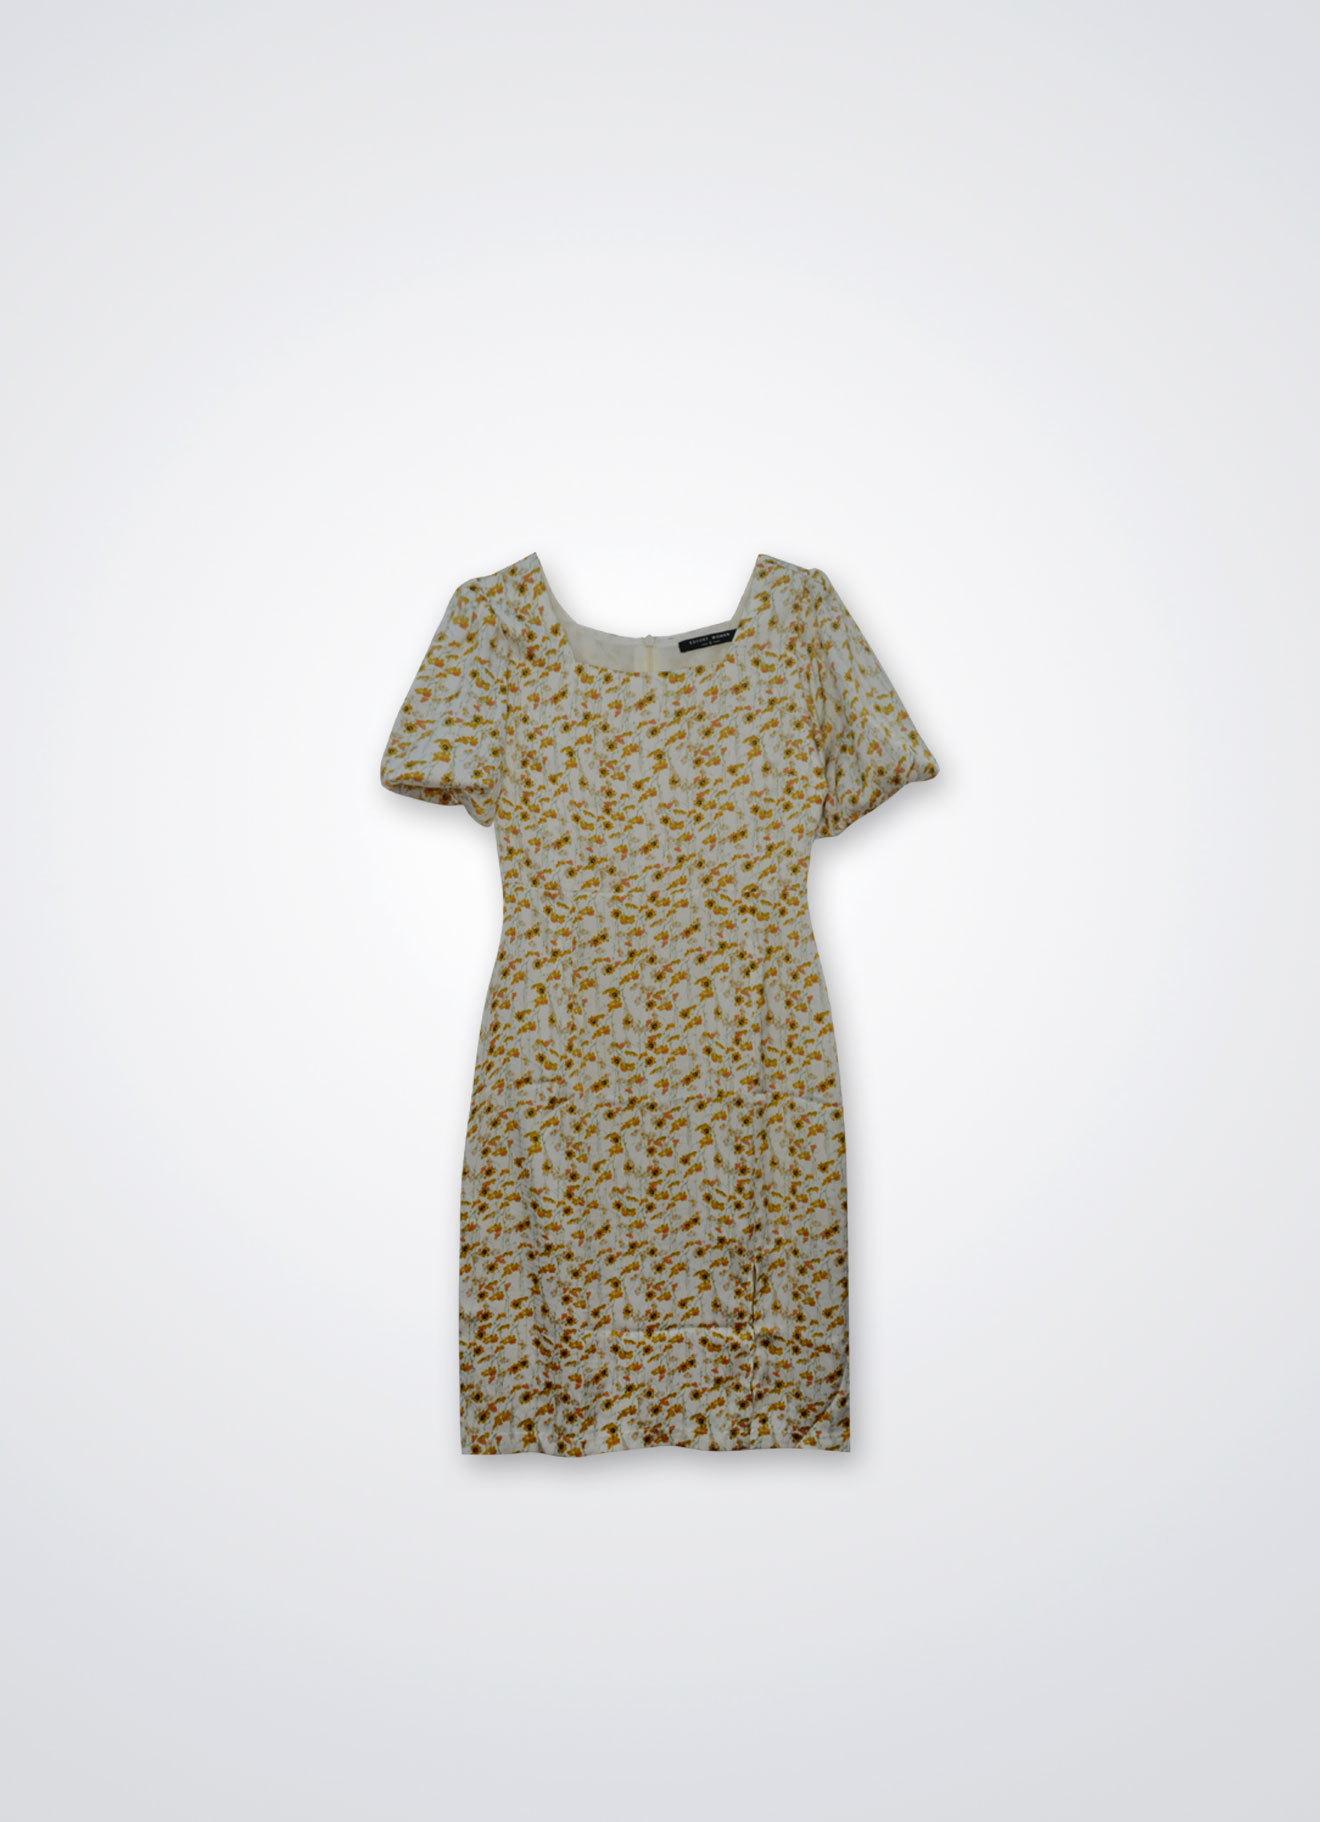 Yolk-Yellow by Floral Printed Dress